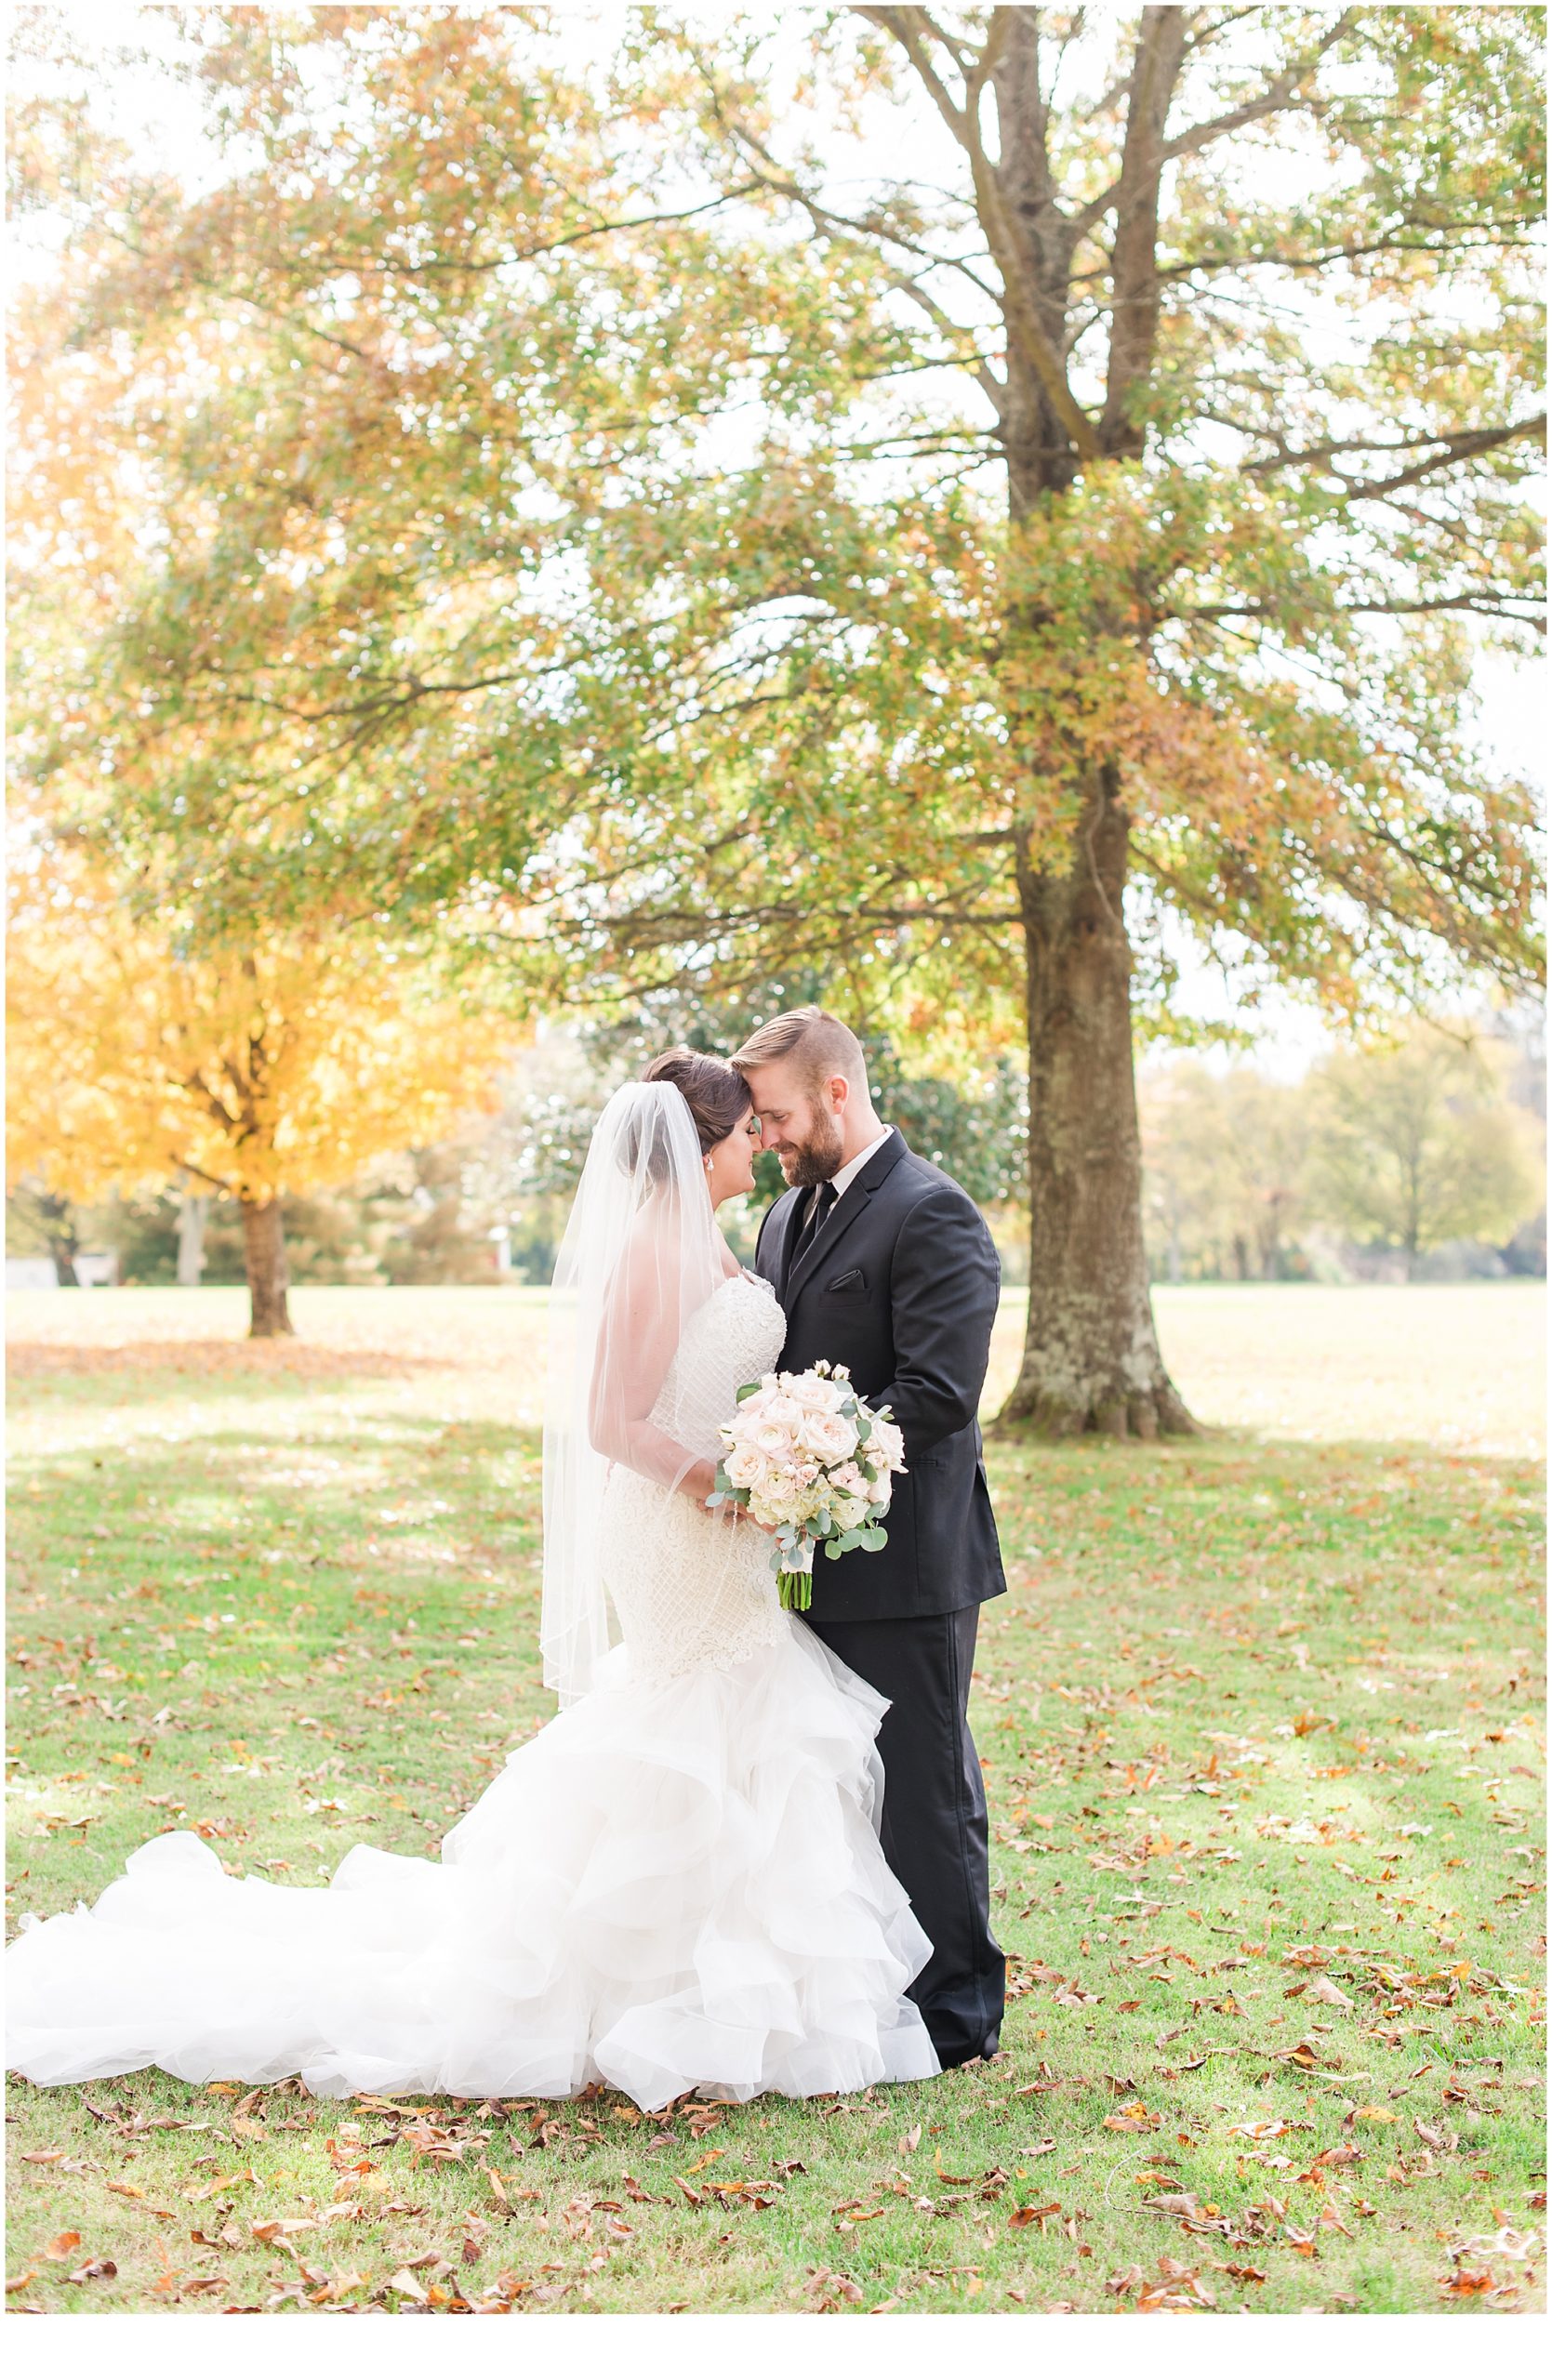 Bride & groom standing in front of fall trees.